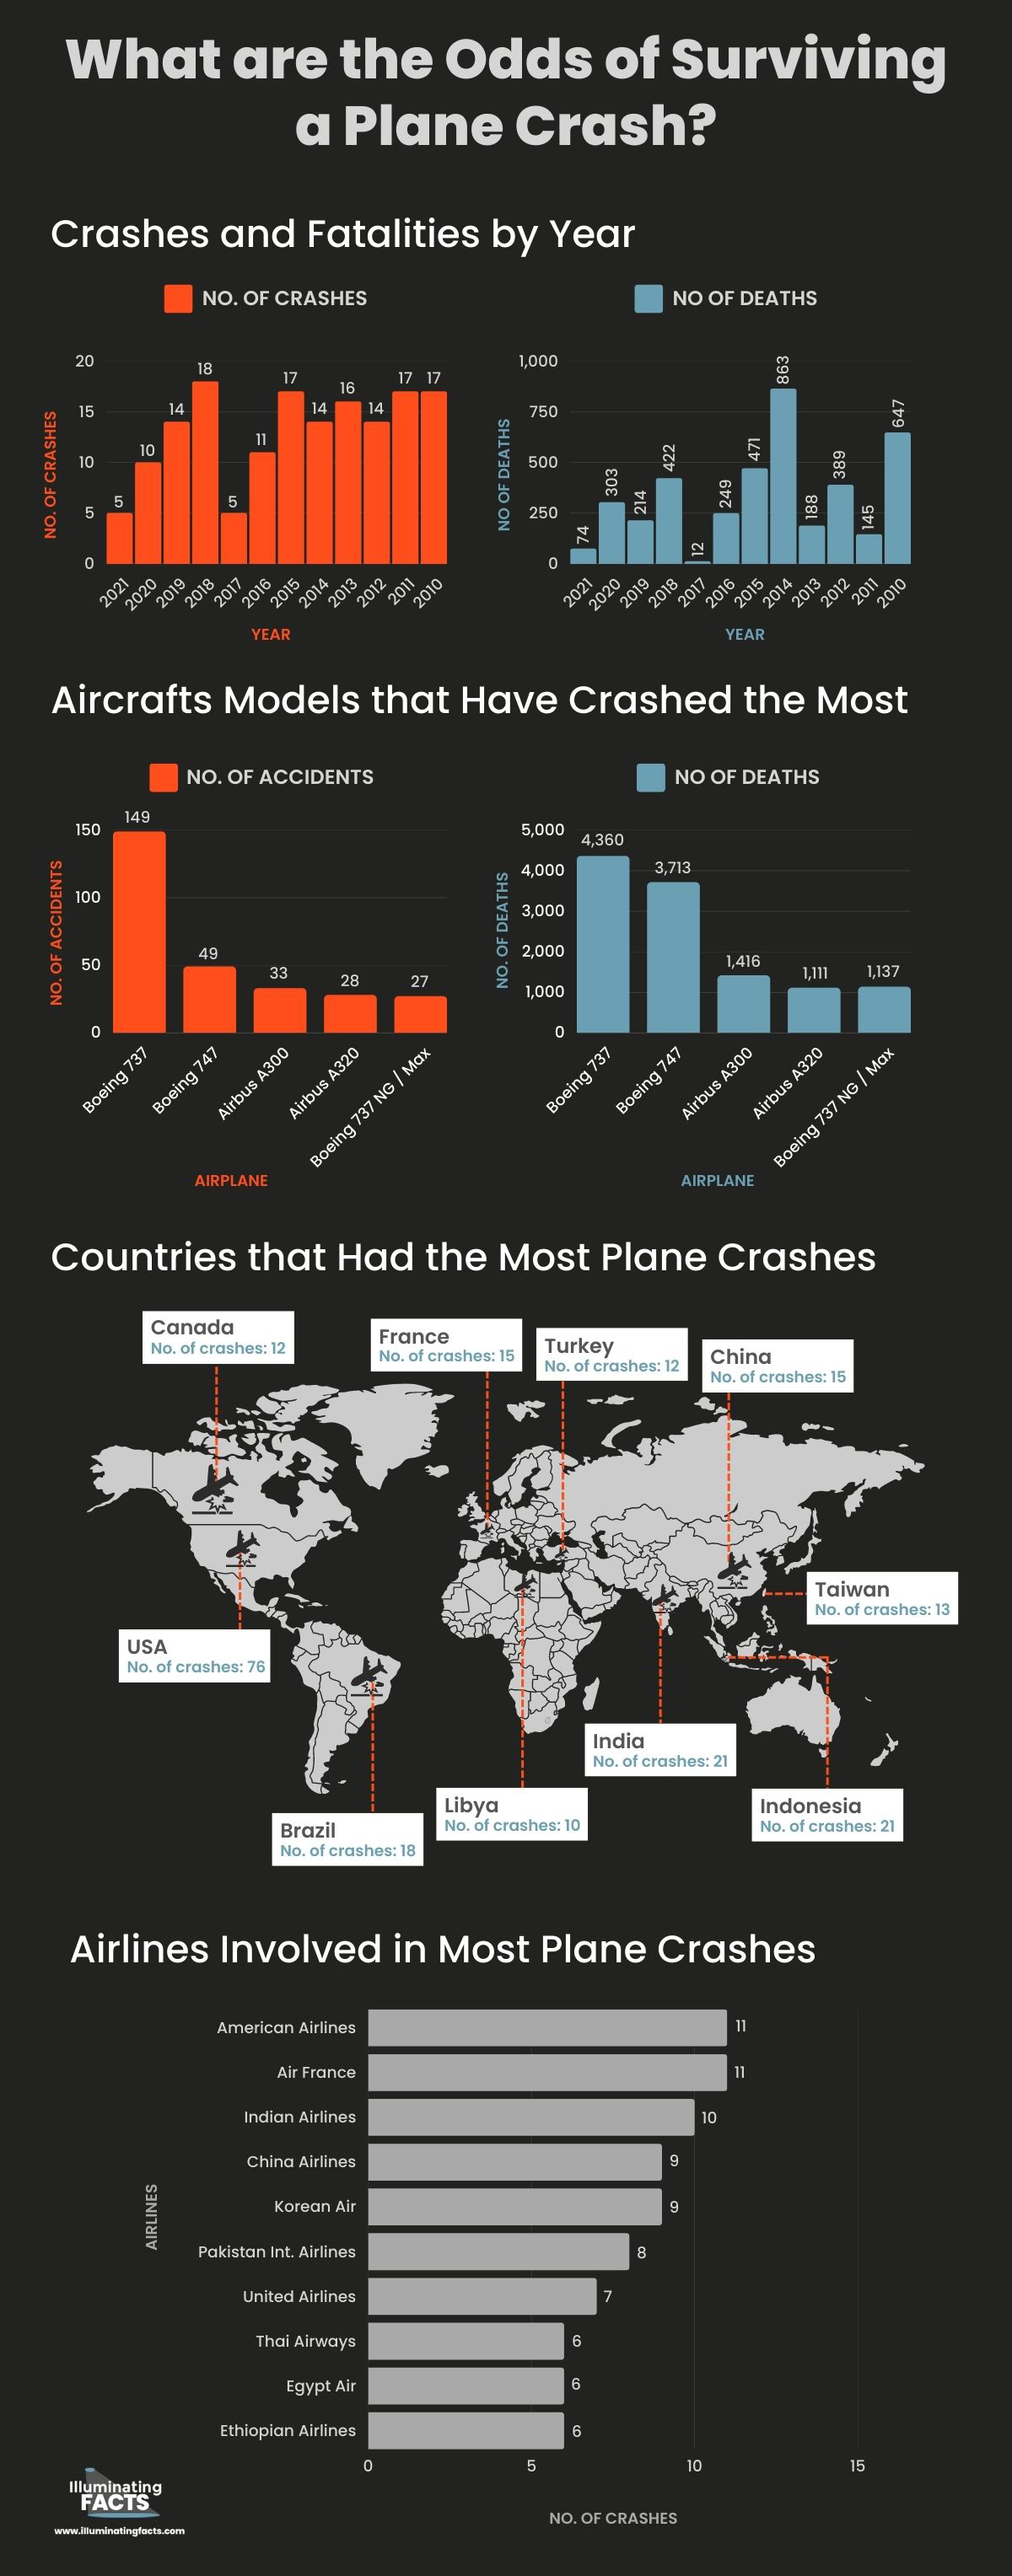 What are the Odds of Surviving a Plane Crash? - 1